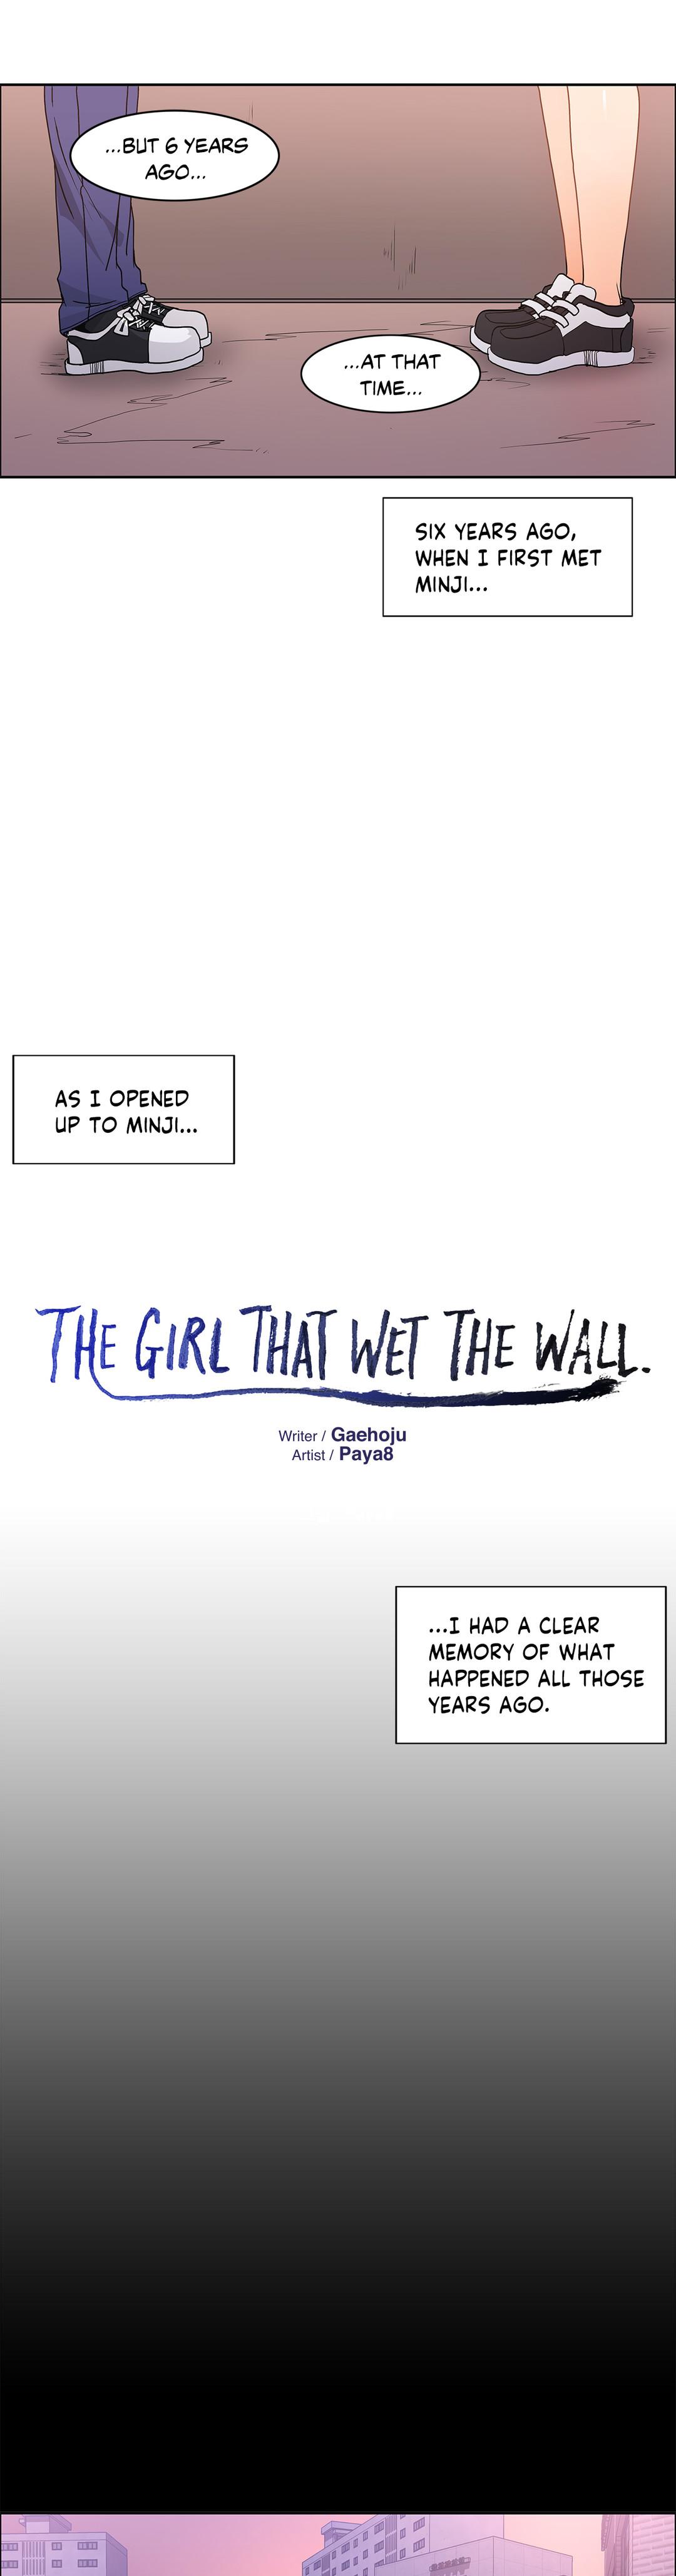 The Girl That Wet the Wall Ch 48 - 50 page 4 full